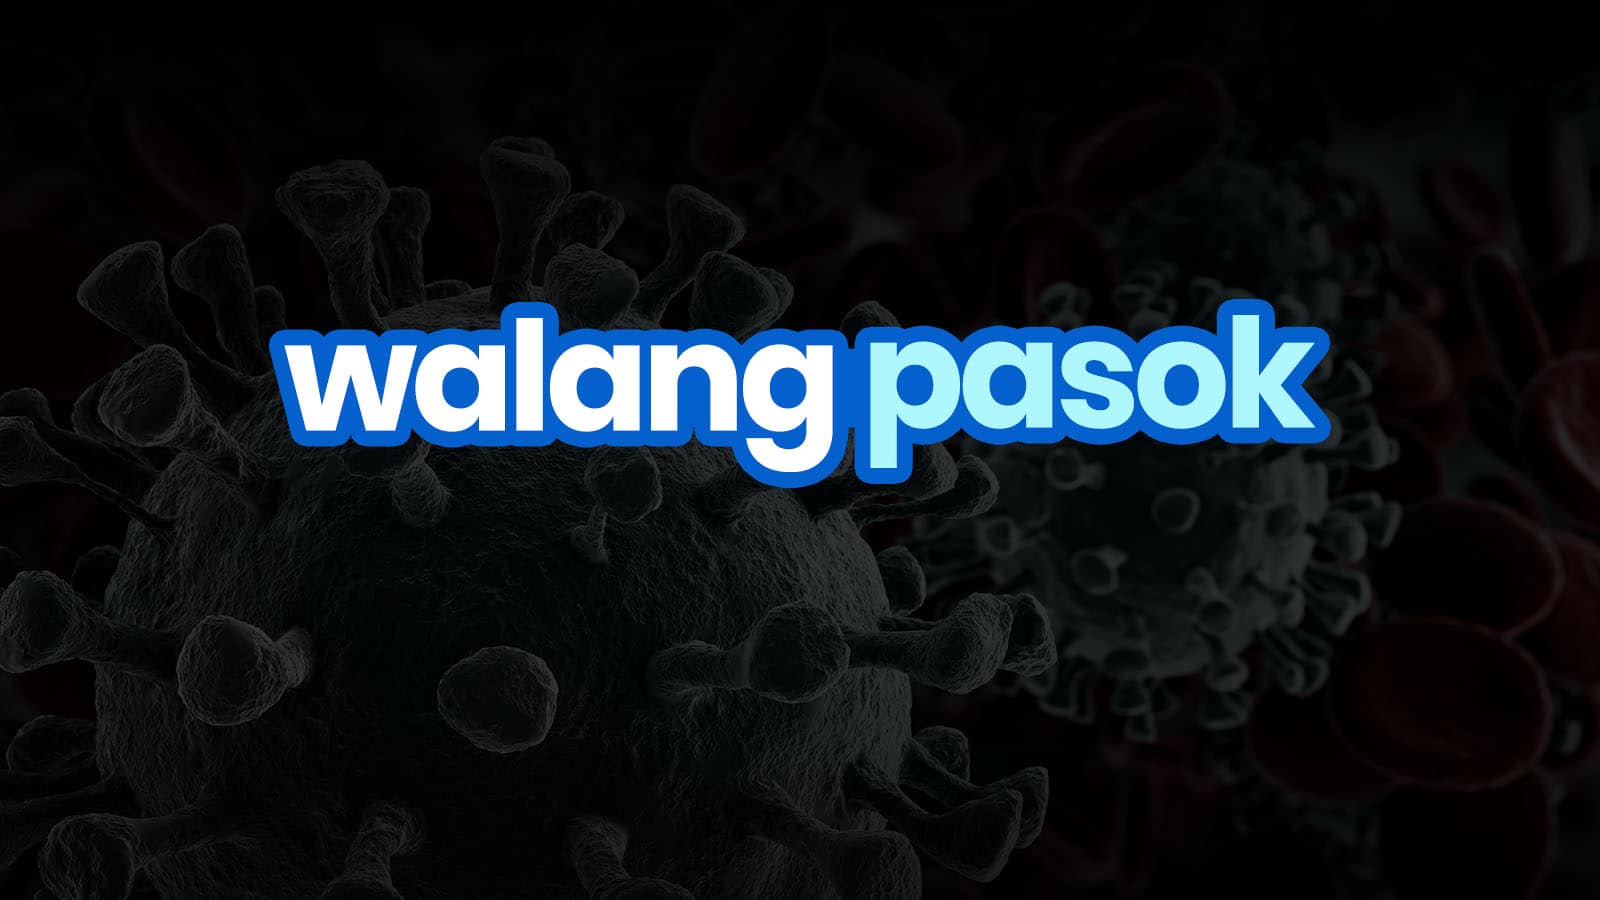 WALANG PASOK: List of Class Suspensions for March-April 2020 Due